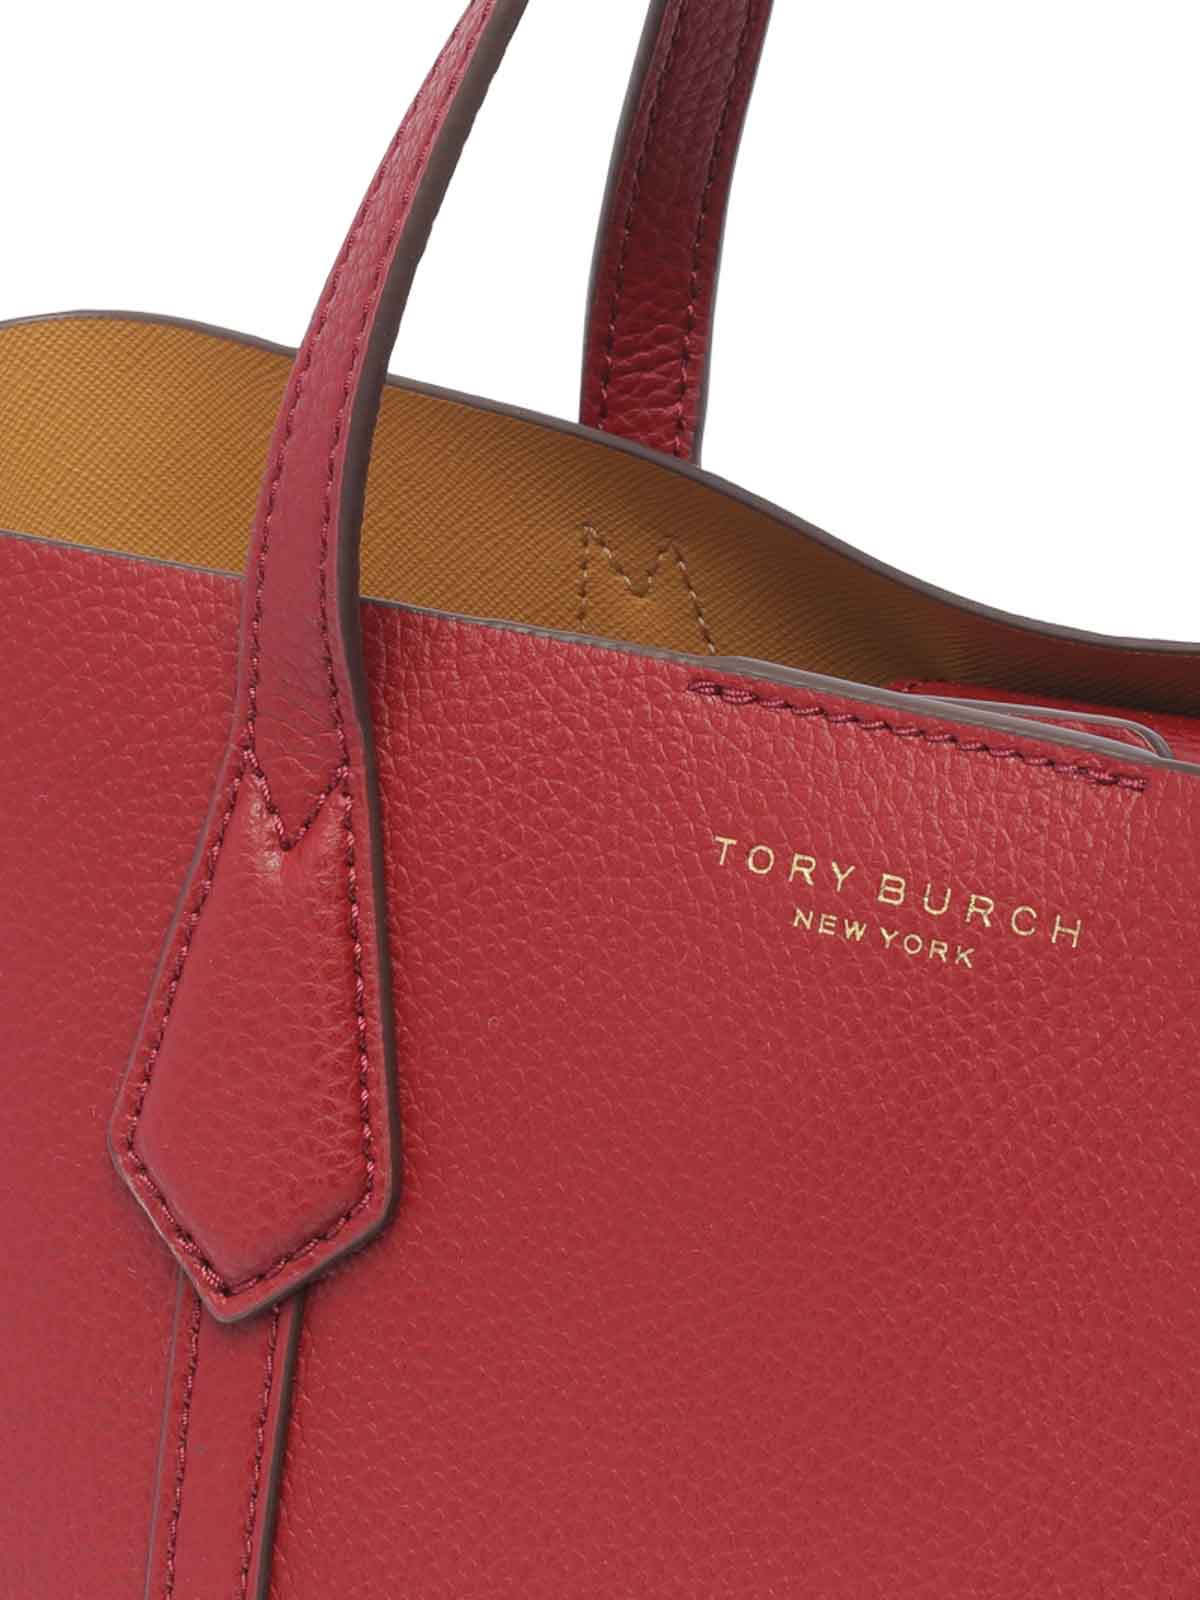 Shop Tory Burch Mini Perry Leather Tote